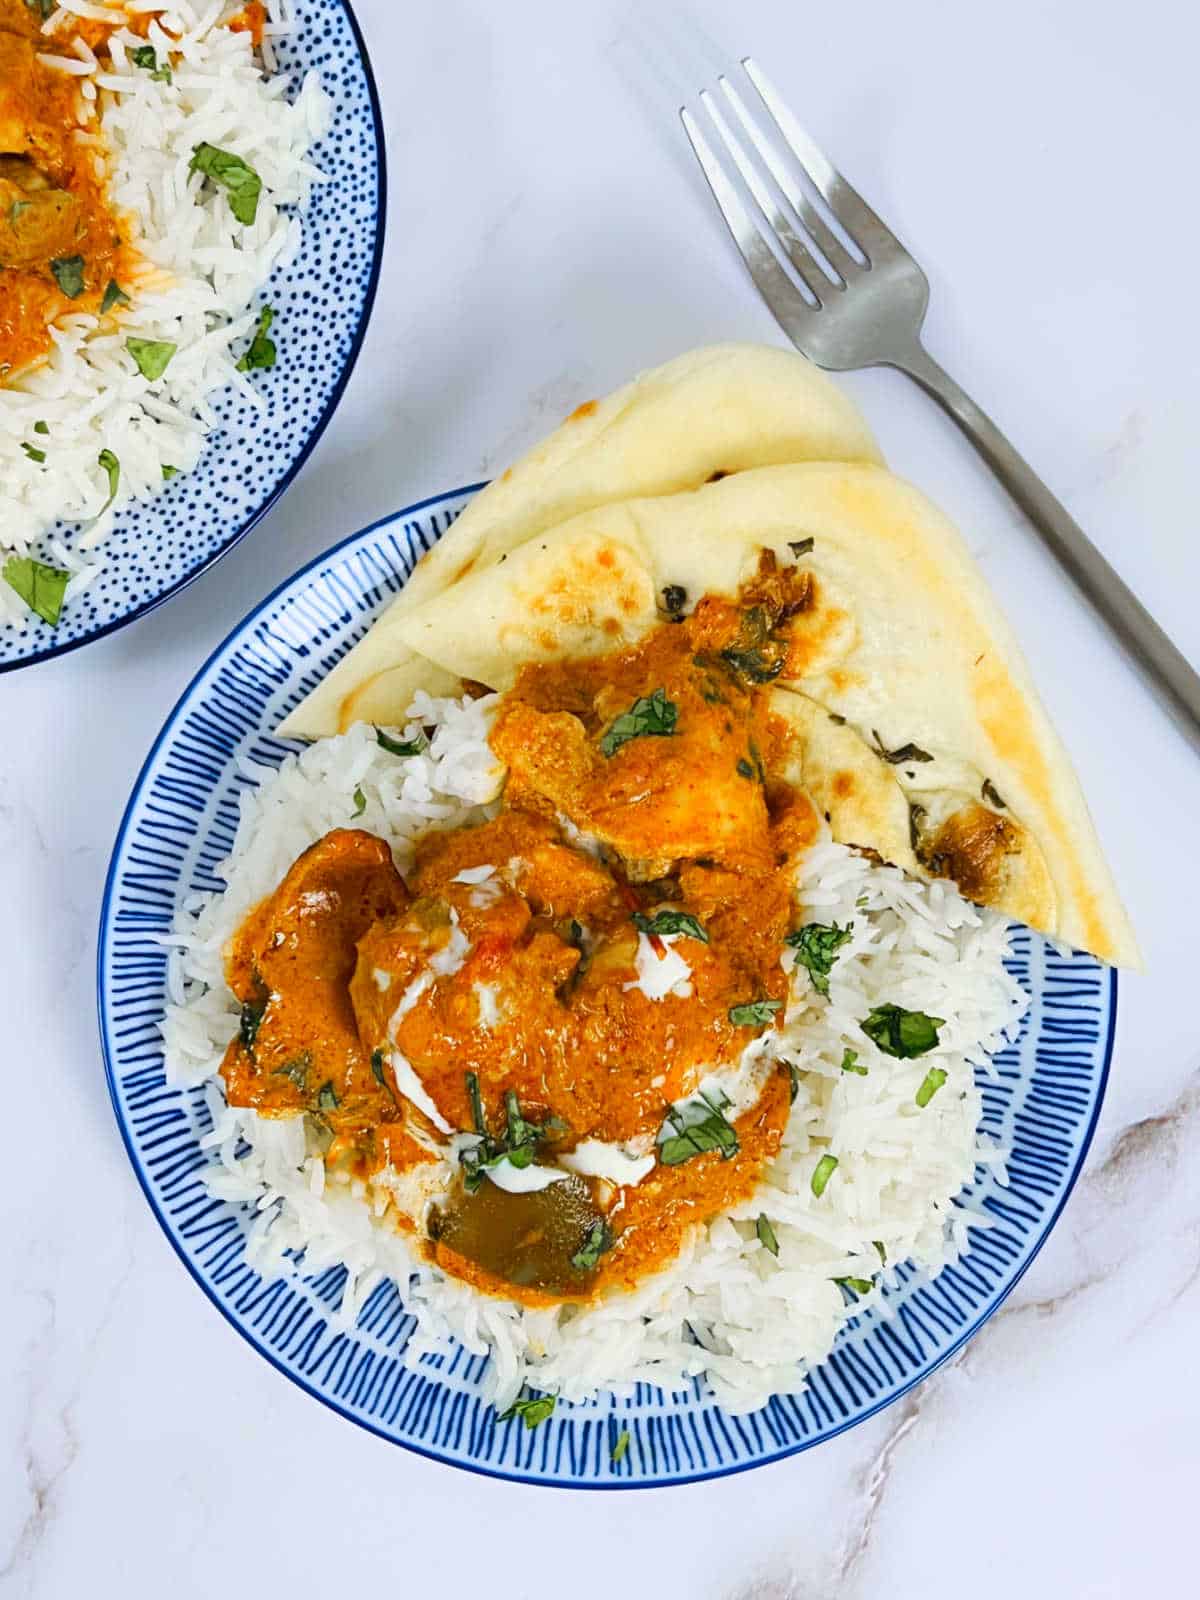 Chicken tikka masala on a bed of rice and naan on a blue plate.